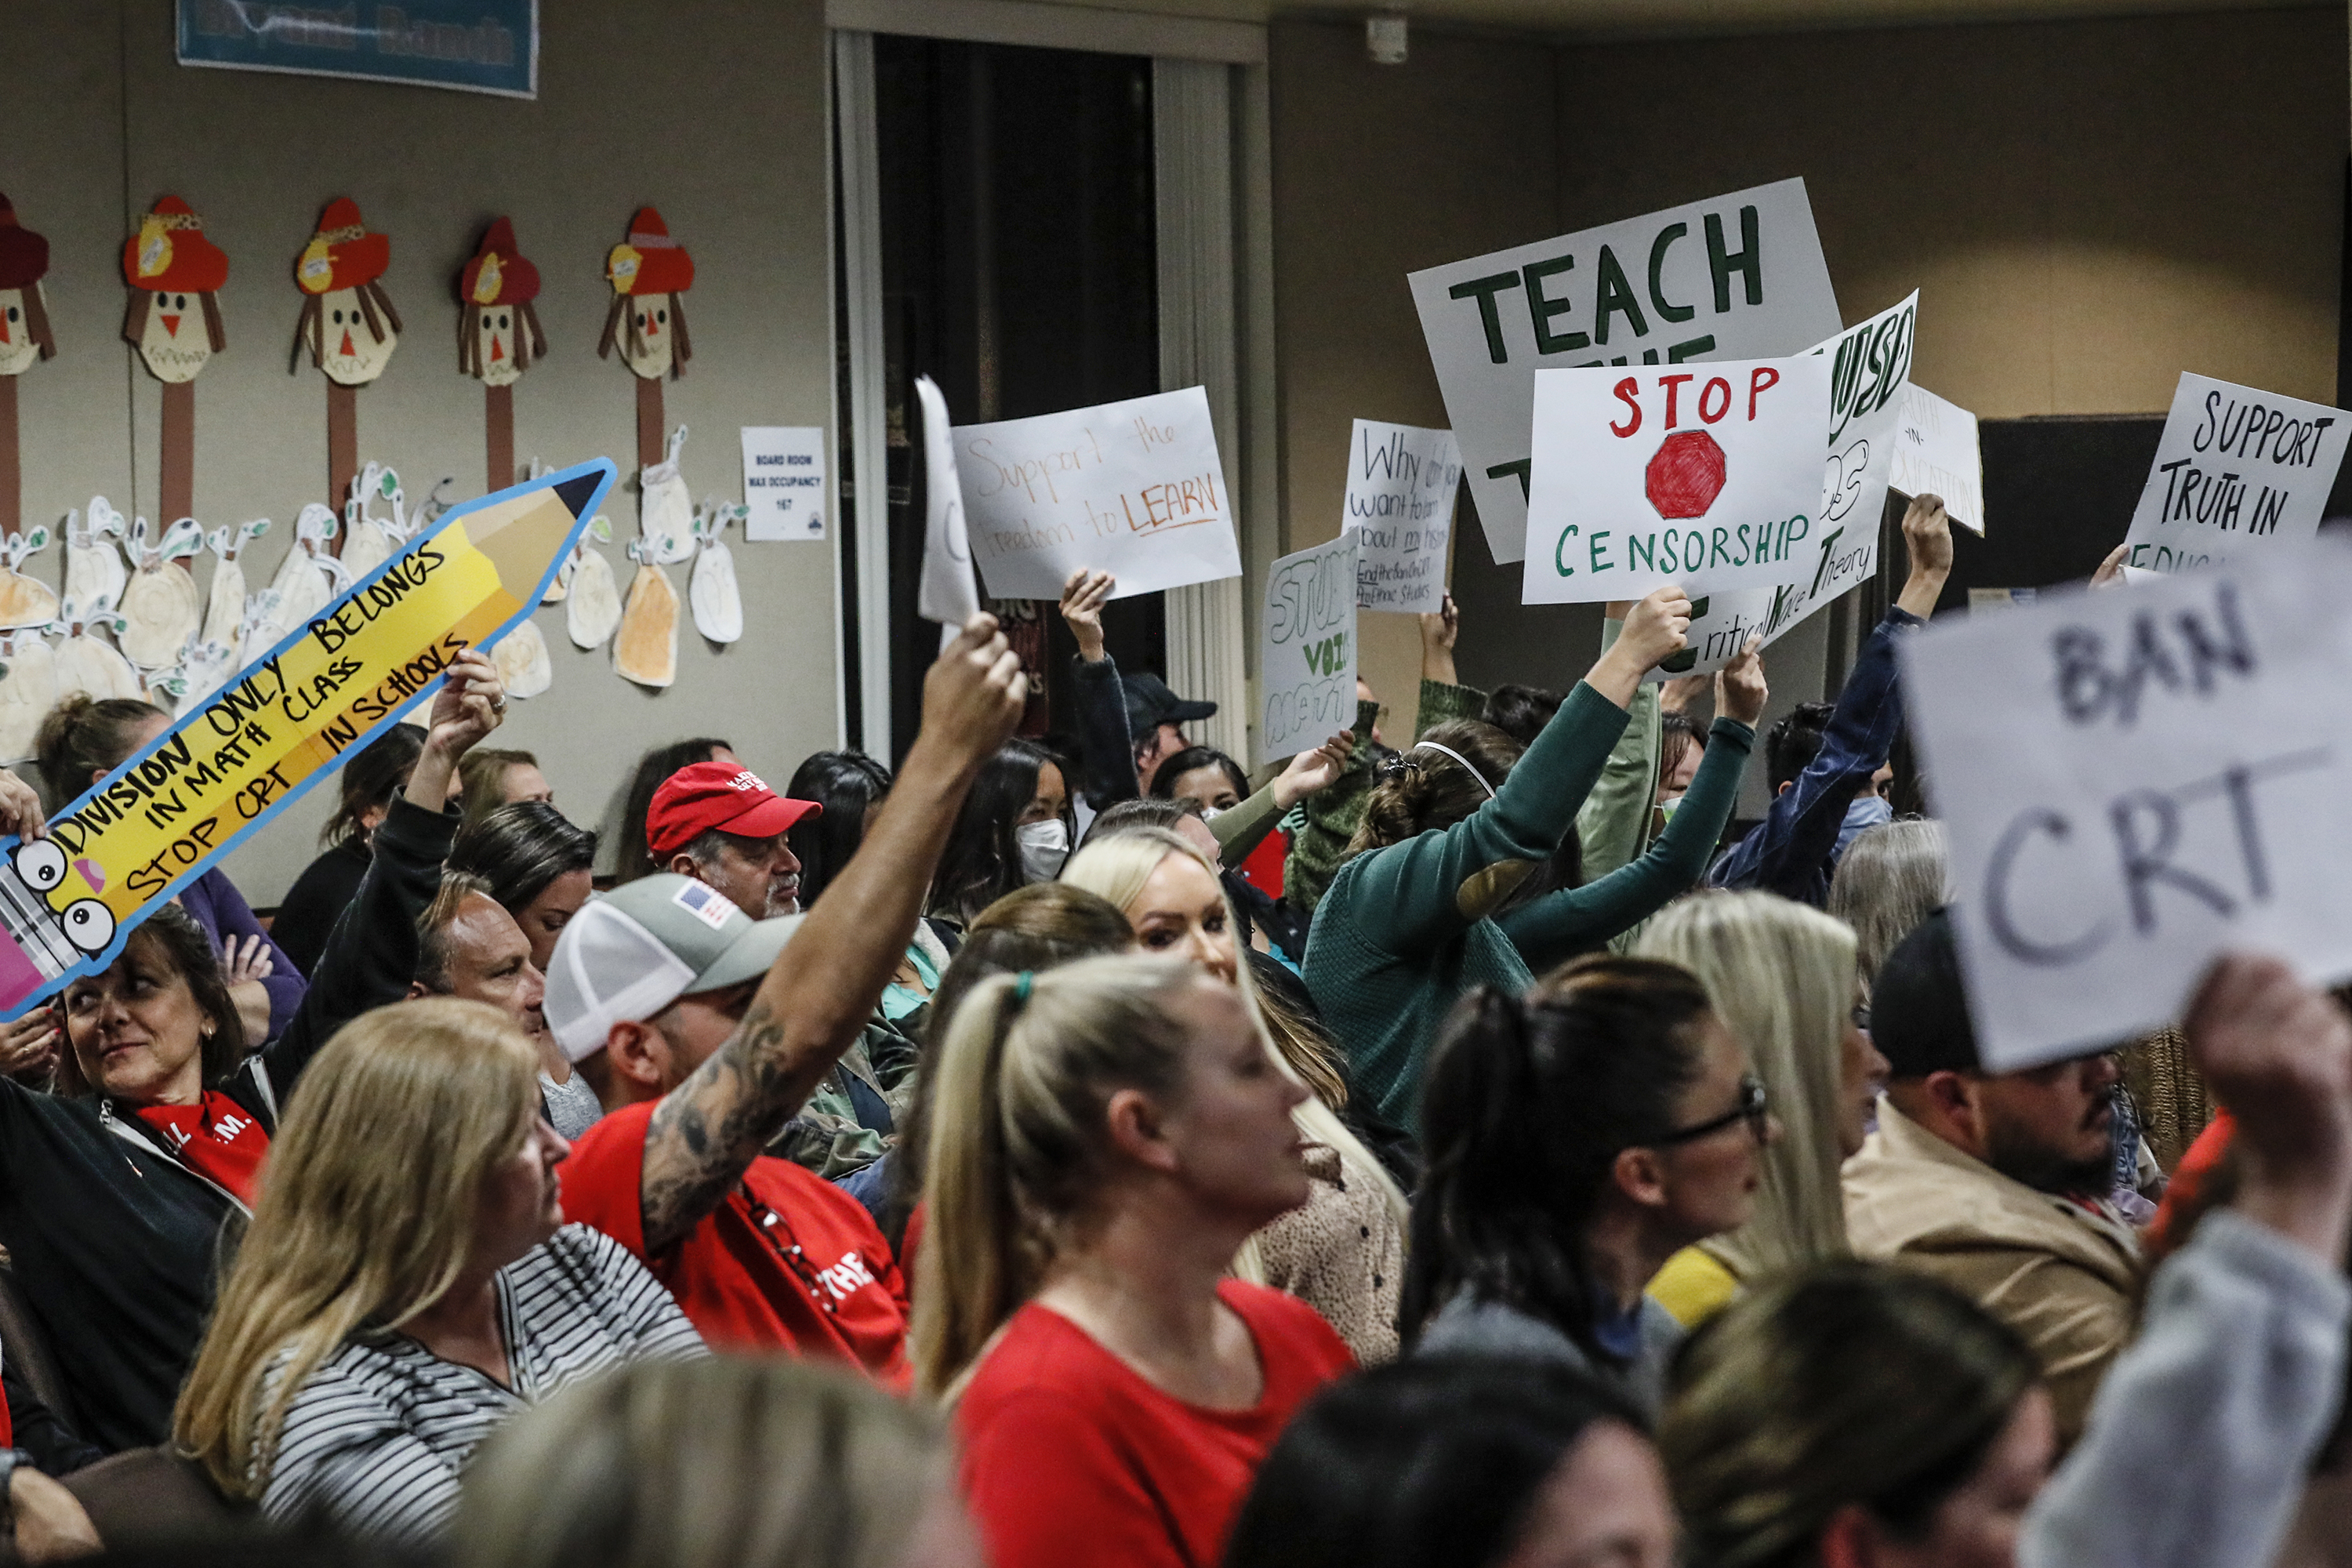 Protesters hold signs at a school board meeting about a proposal to ban critical race theory from schools in Yorba Linda, Calif., on Nov. 16, 2021. (Robert Gauthier—Los Angeles Times/Getty Images)